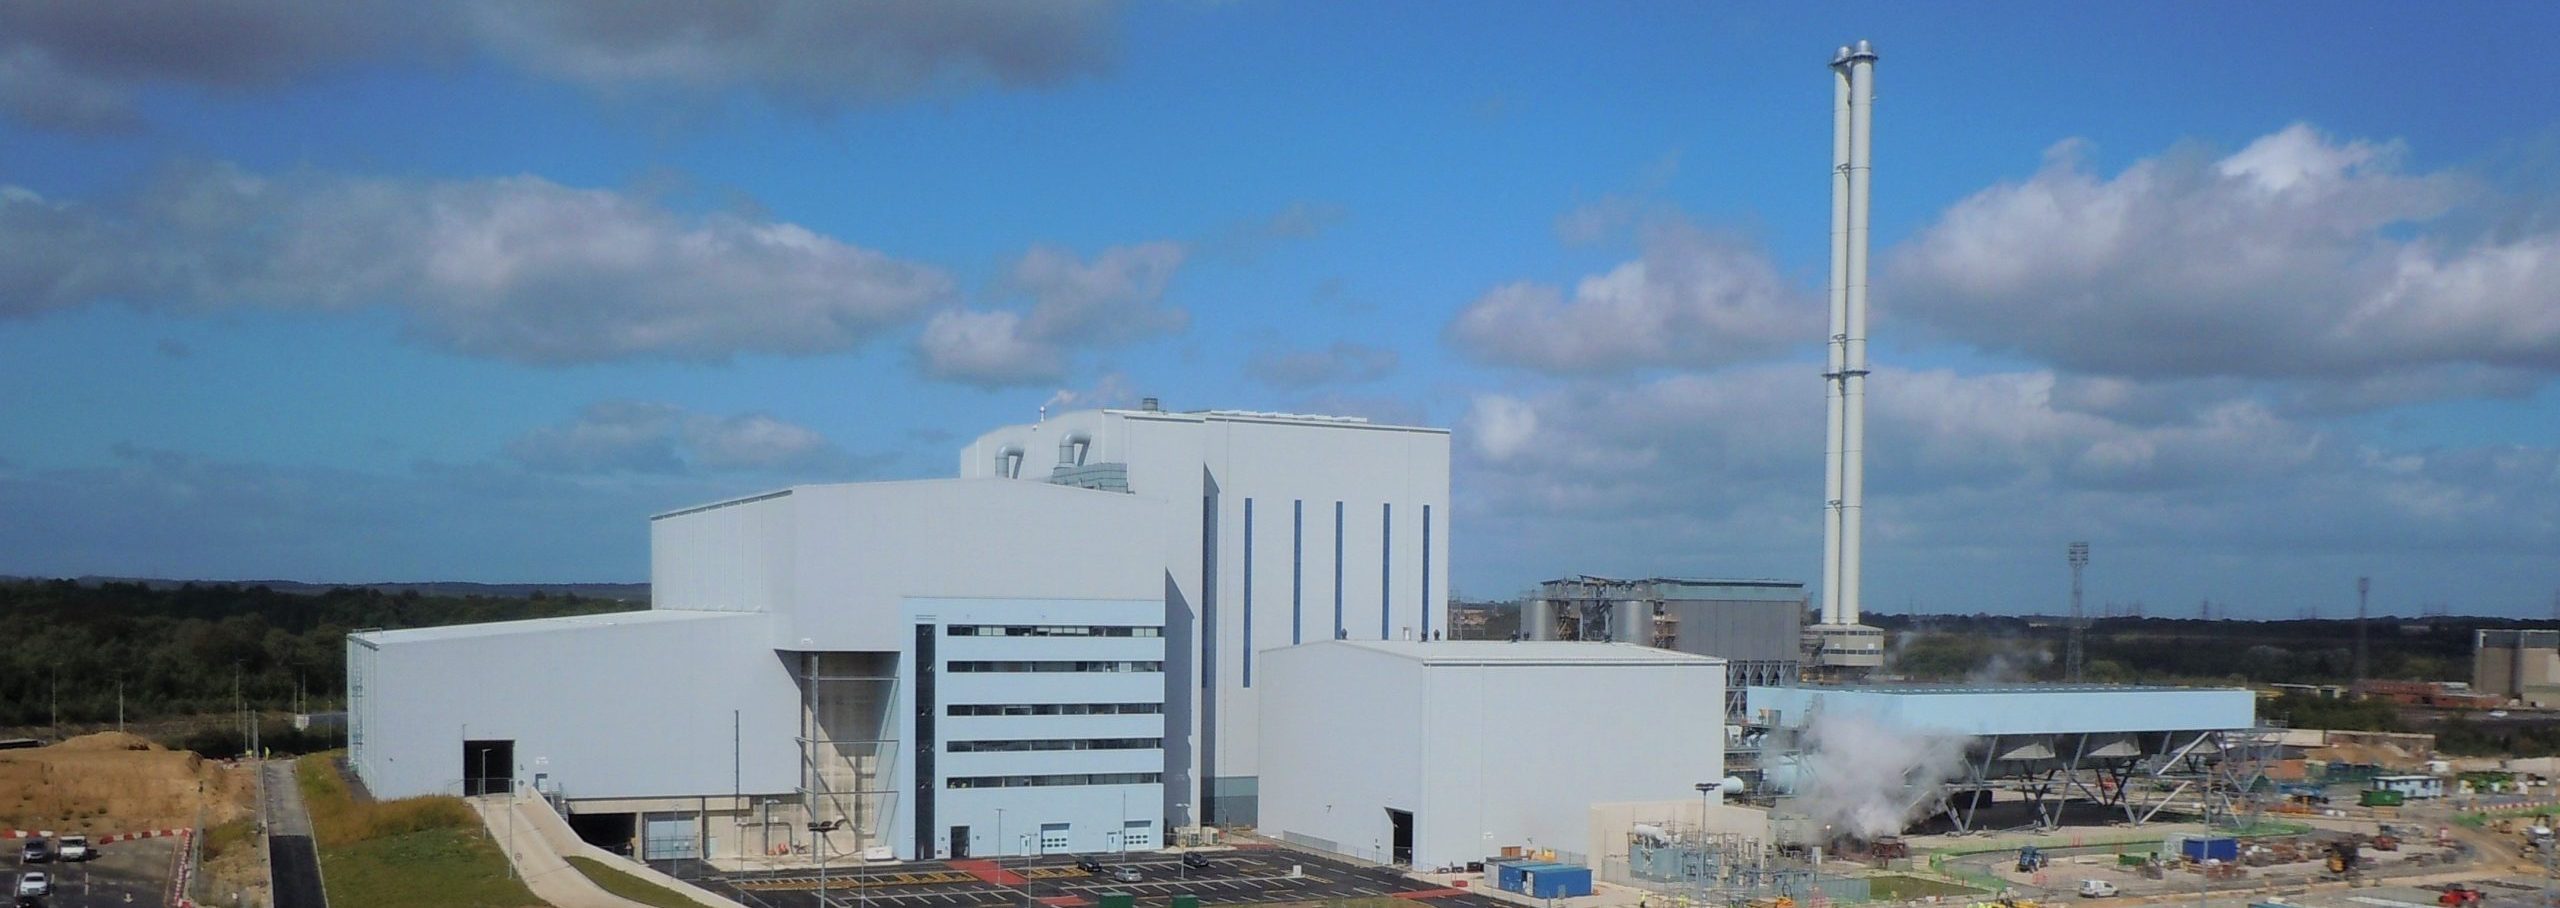 Energy from waste power plant